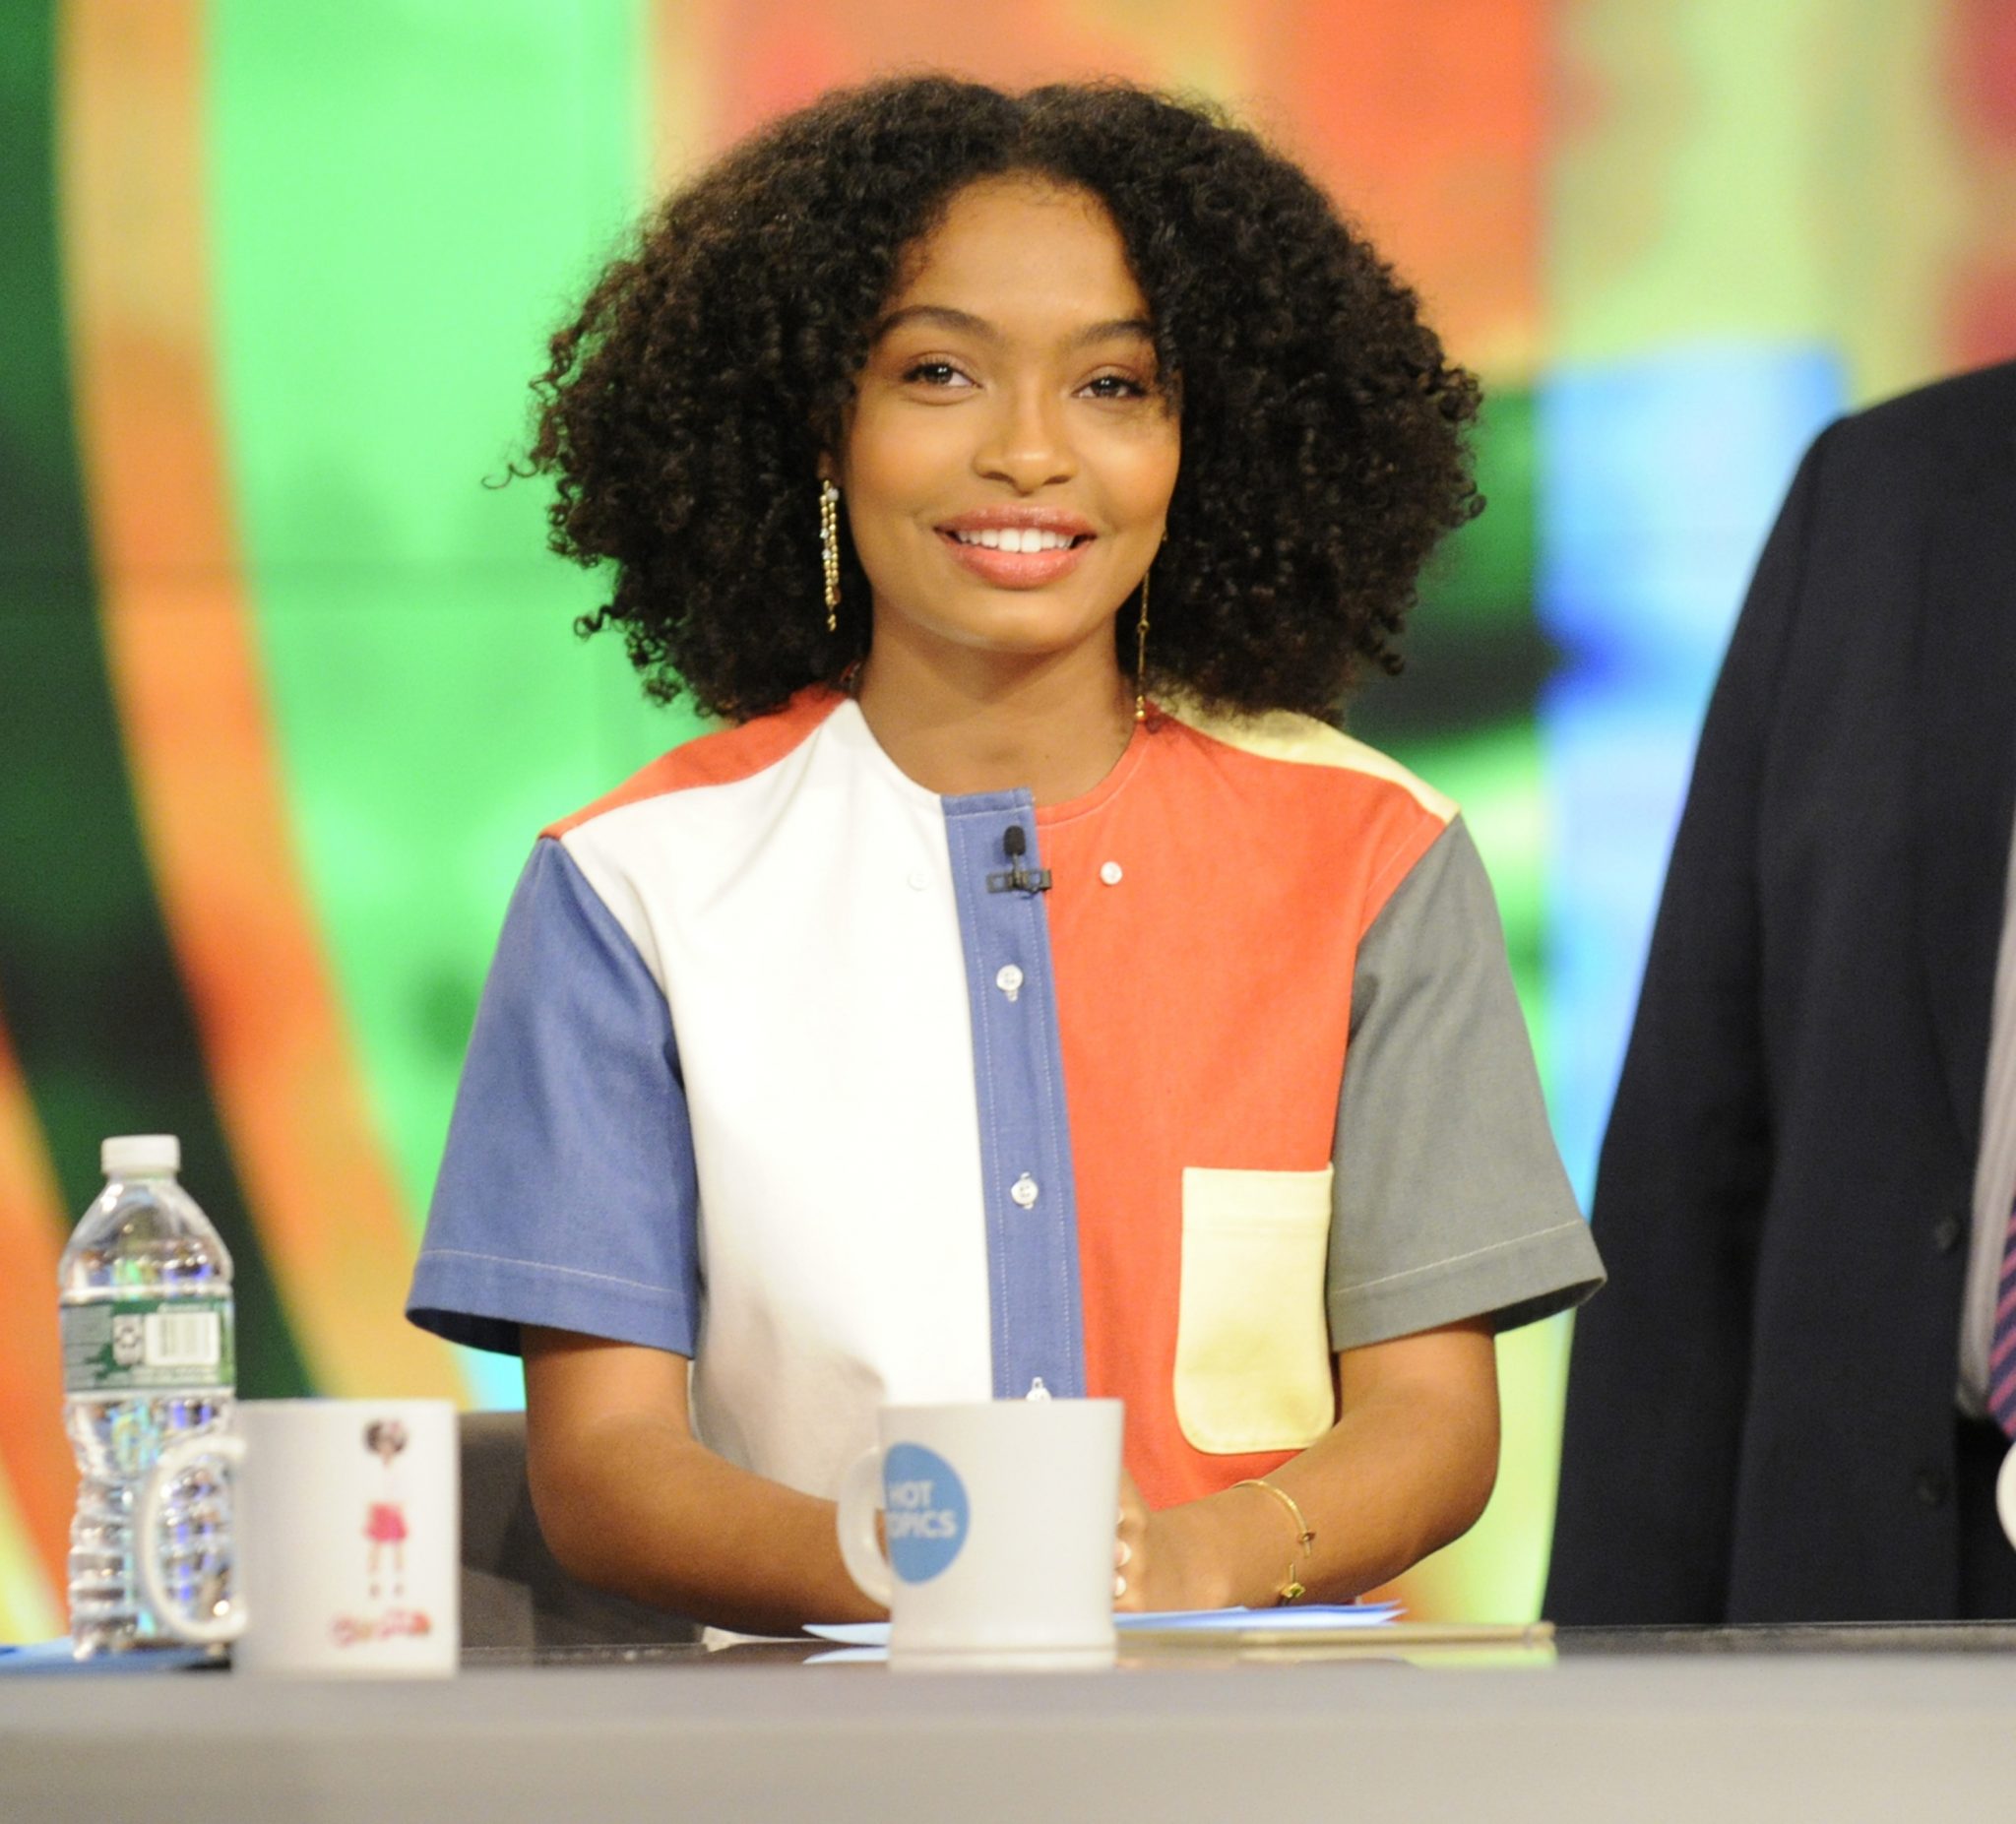 In Case You Missed It: Yara Shahidi On The View